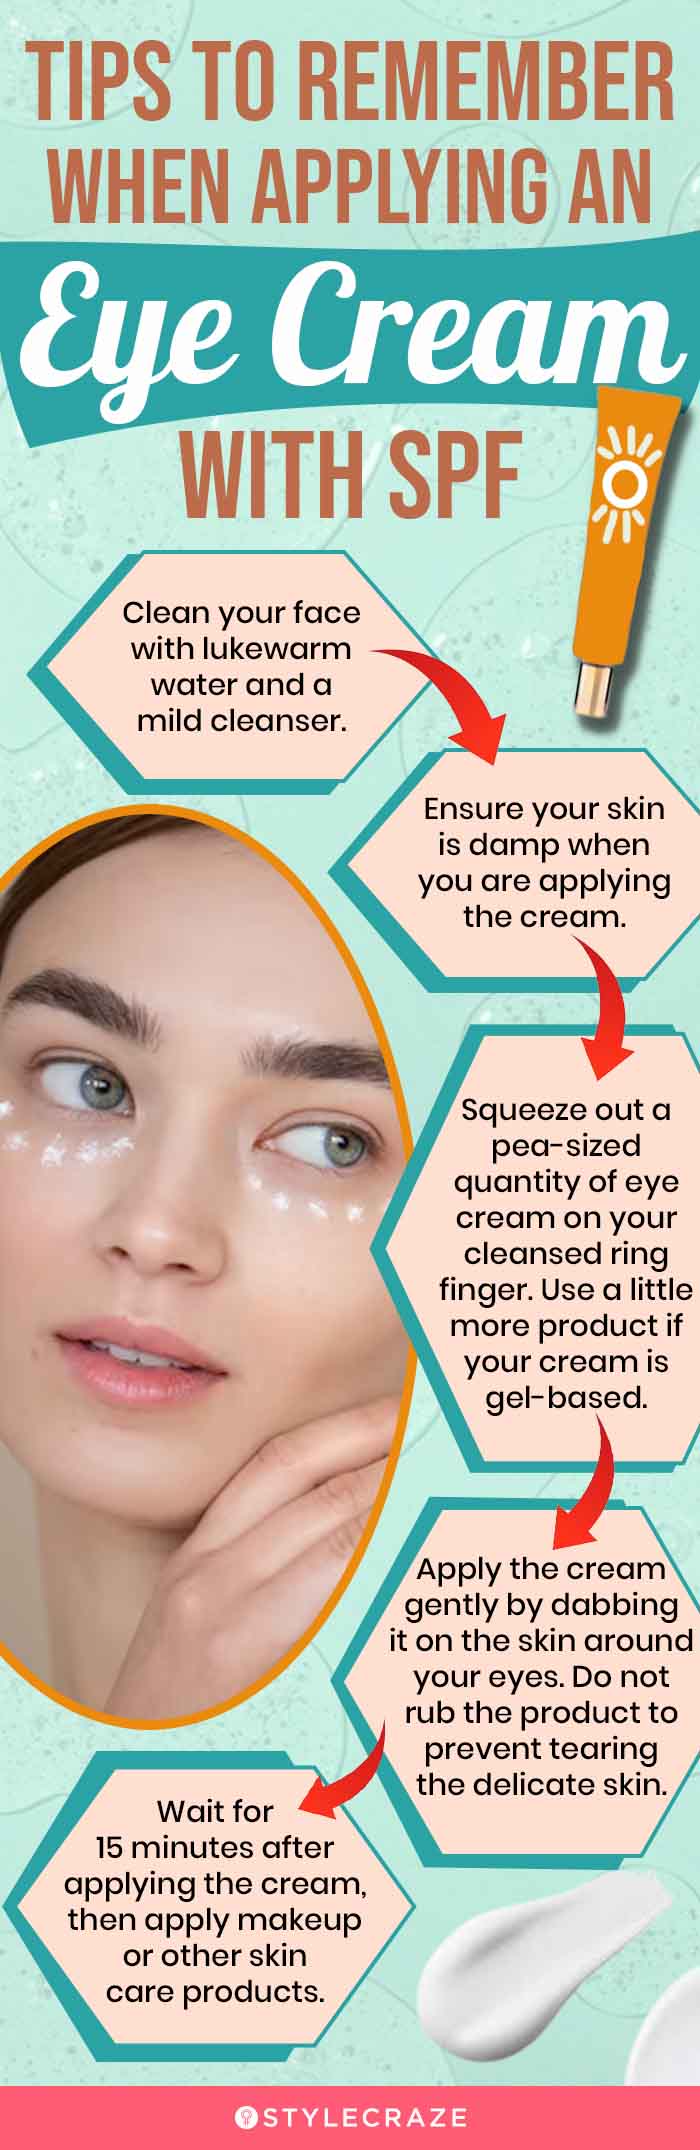 Tips To Remember When Applying An Eye Cream With SPF (infographic)